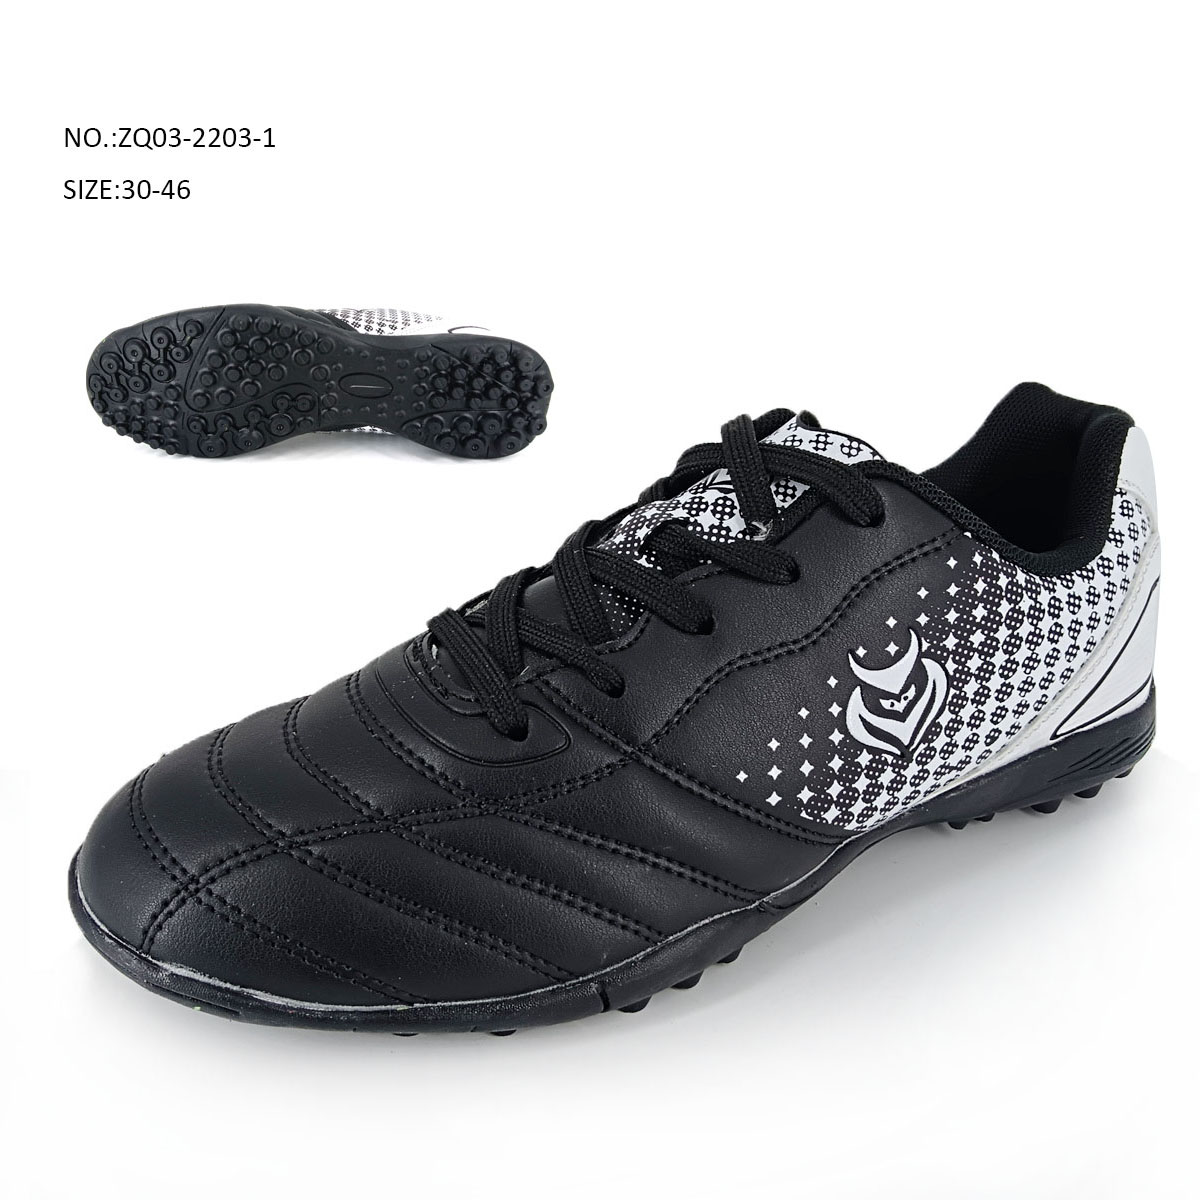 High quality football nail indoor general training shoes 1. ITEM...